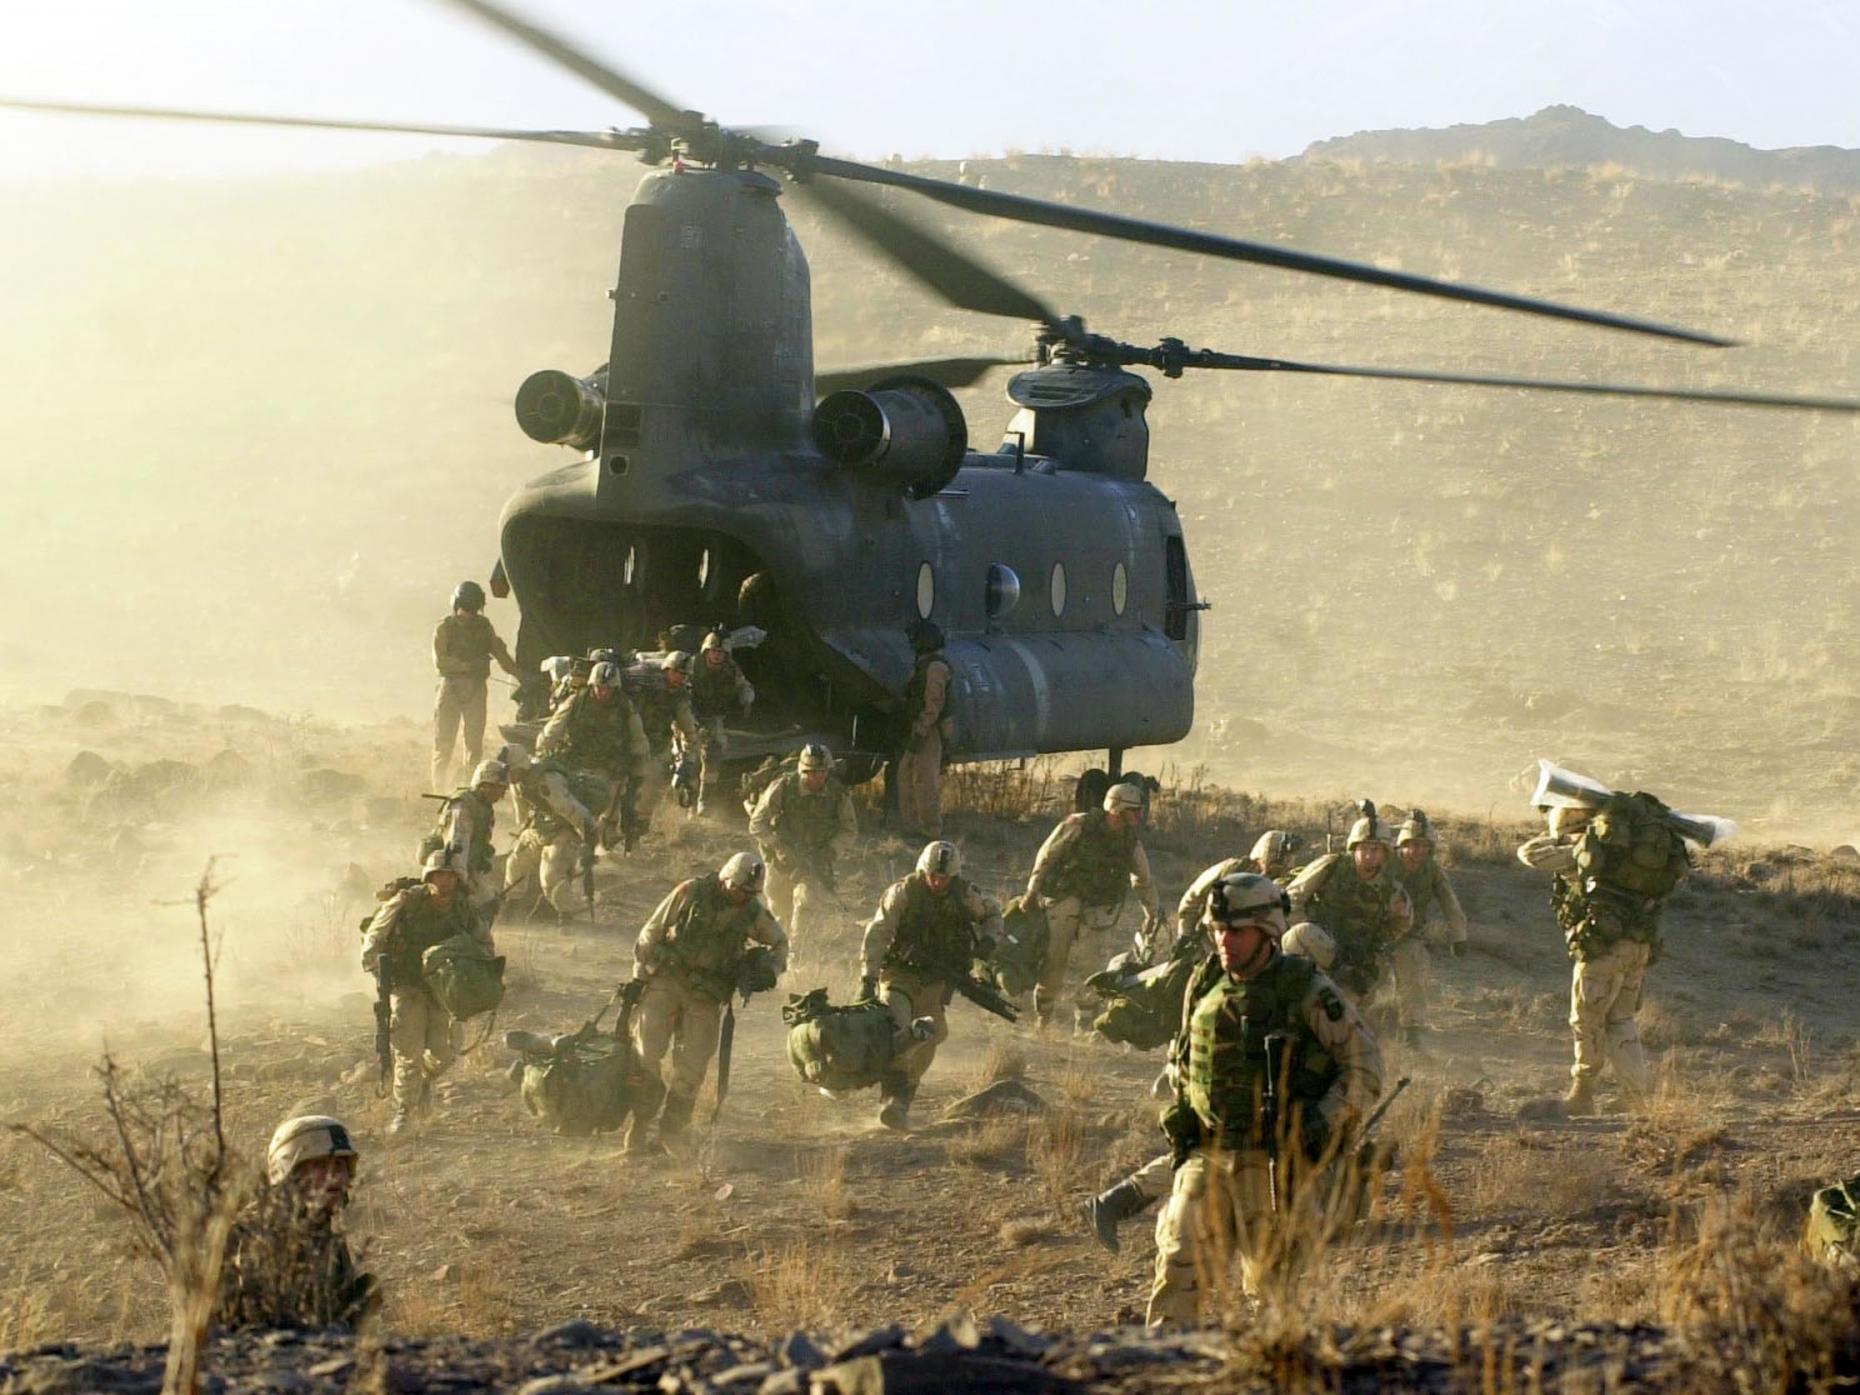 The US has lost over 2,300 troops in the course of the Afghan war